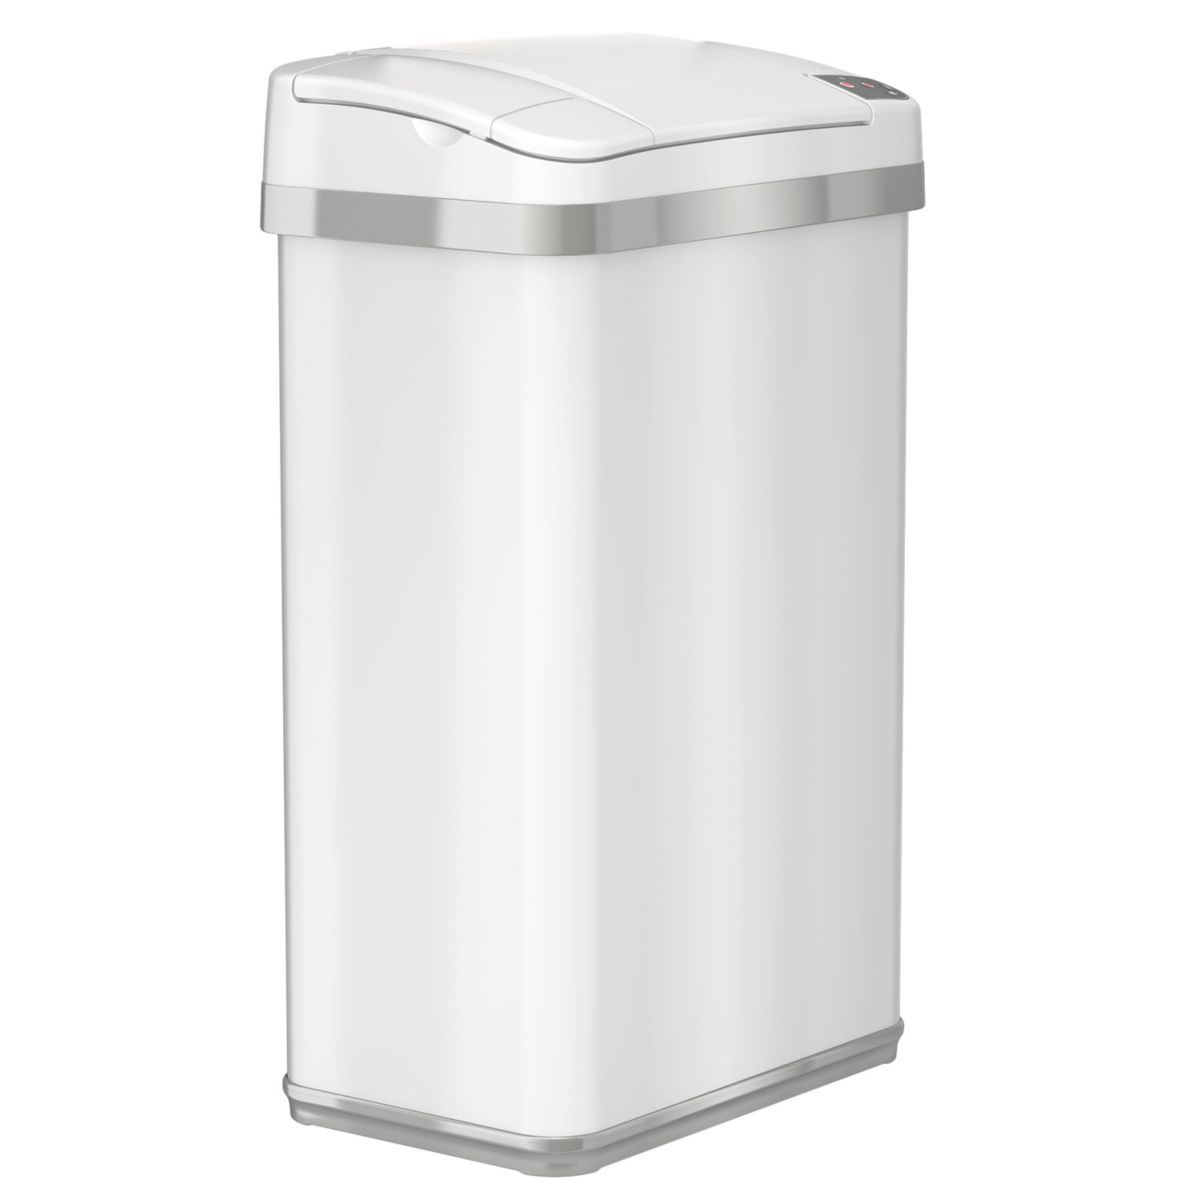 Halo Multifunction Sensor 4-Gallon Trash Can ITouchless